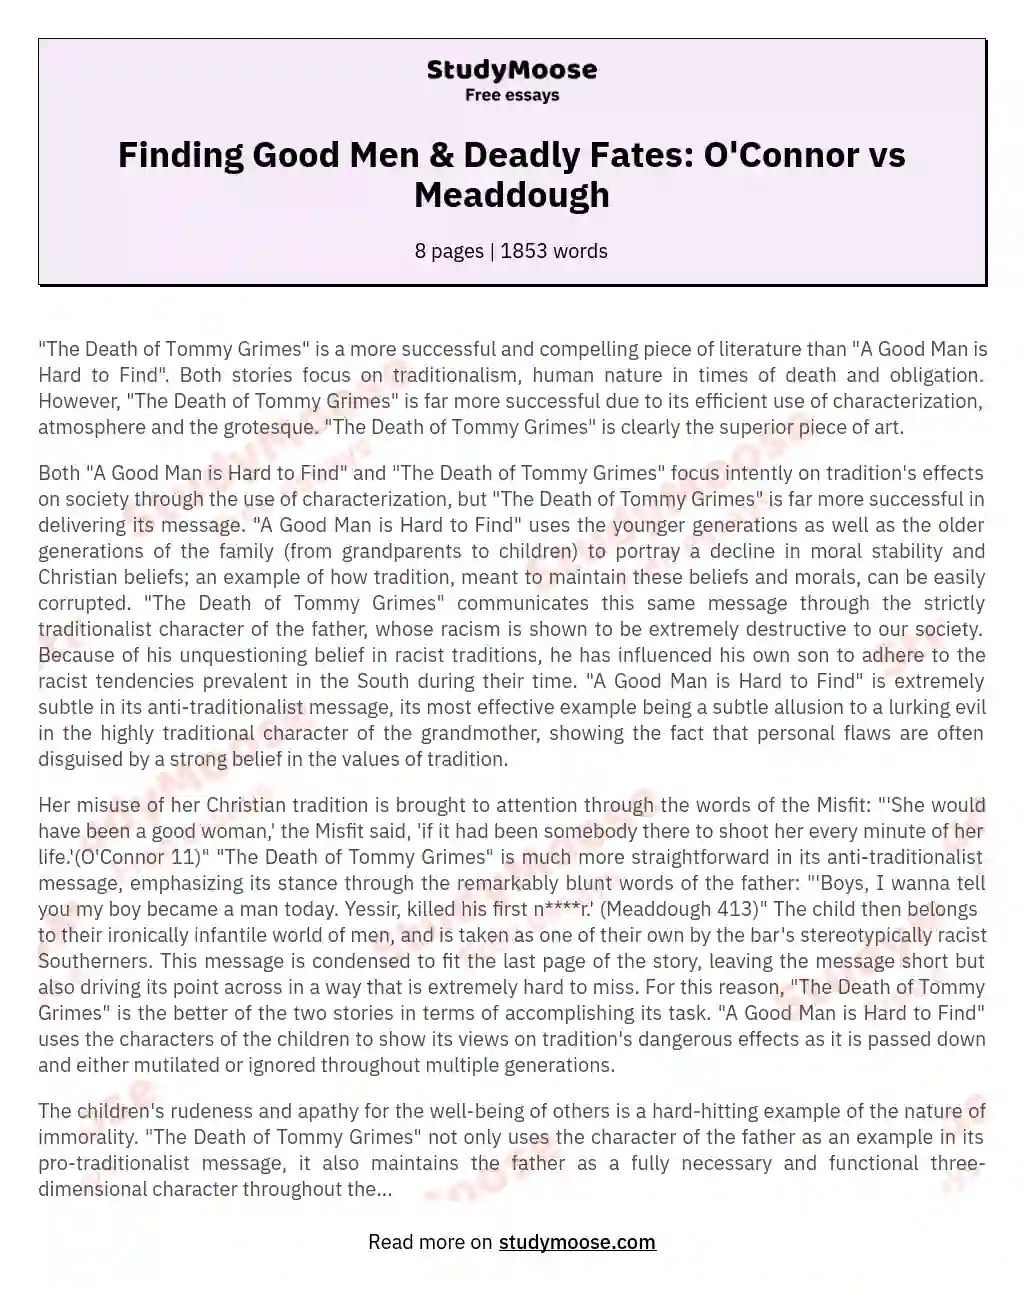 "The Death of Tommy Grimes" Triumphs Over "A Good Man is Hard to Find" essay